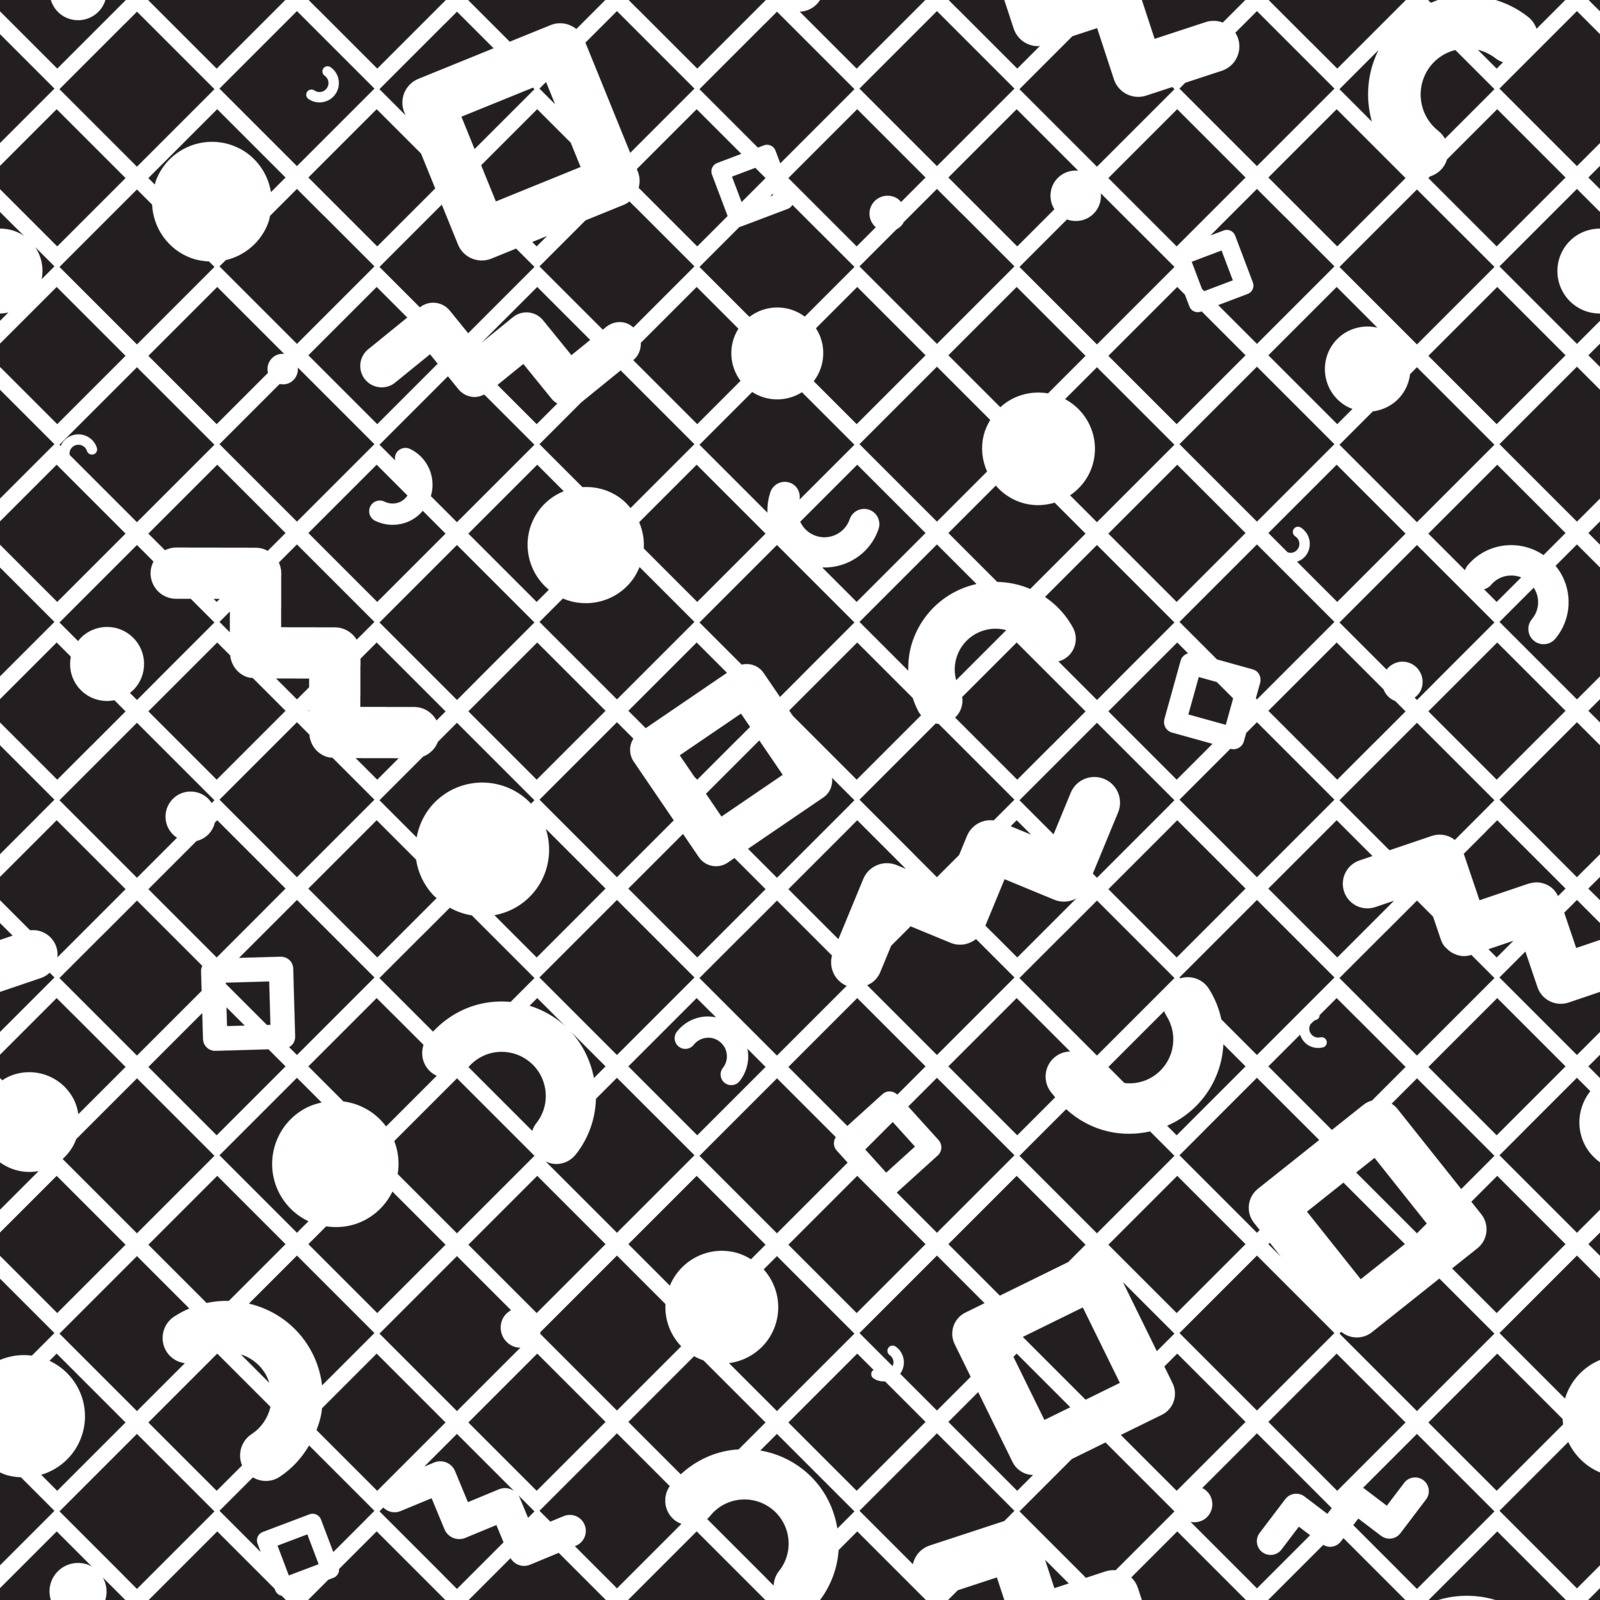 Vector seamless pattern. Universal repeating geometric abstract figure in black and white. Wallpaper, wrapping paper, interior, memphis, retro 80s, 90s style 